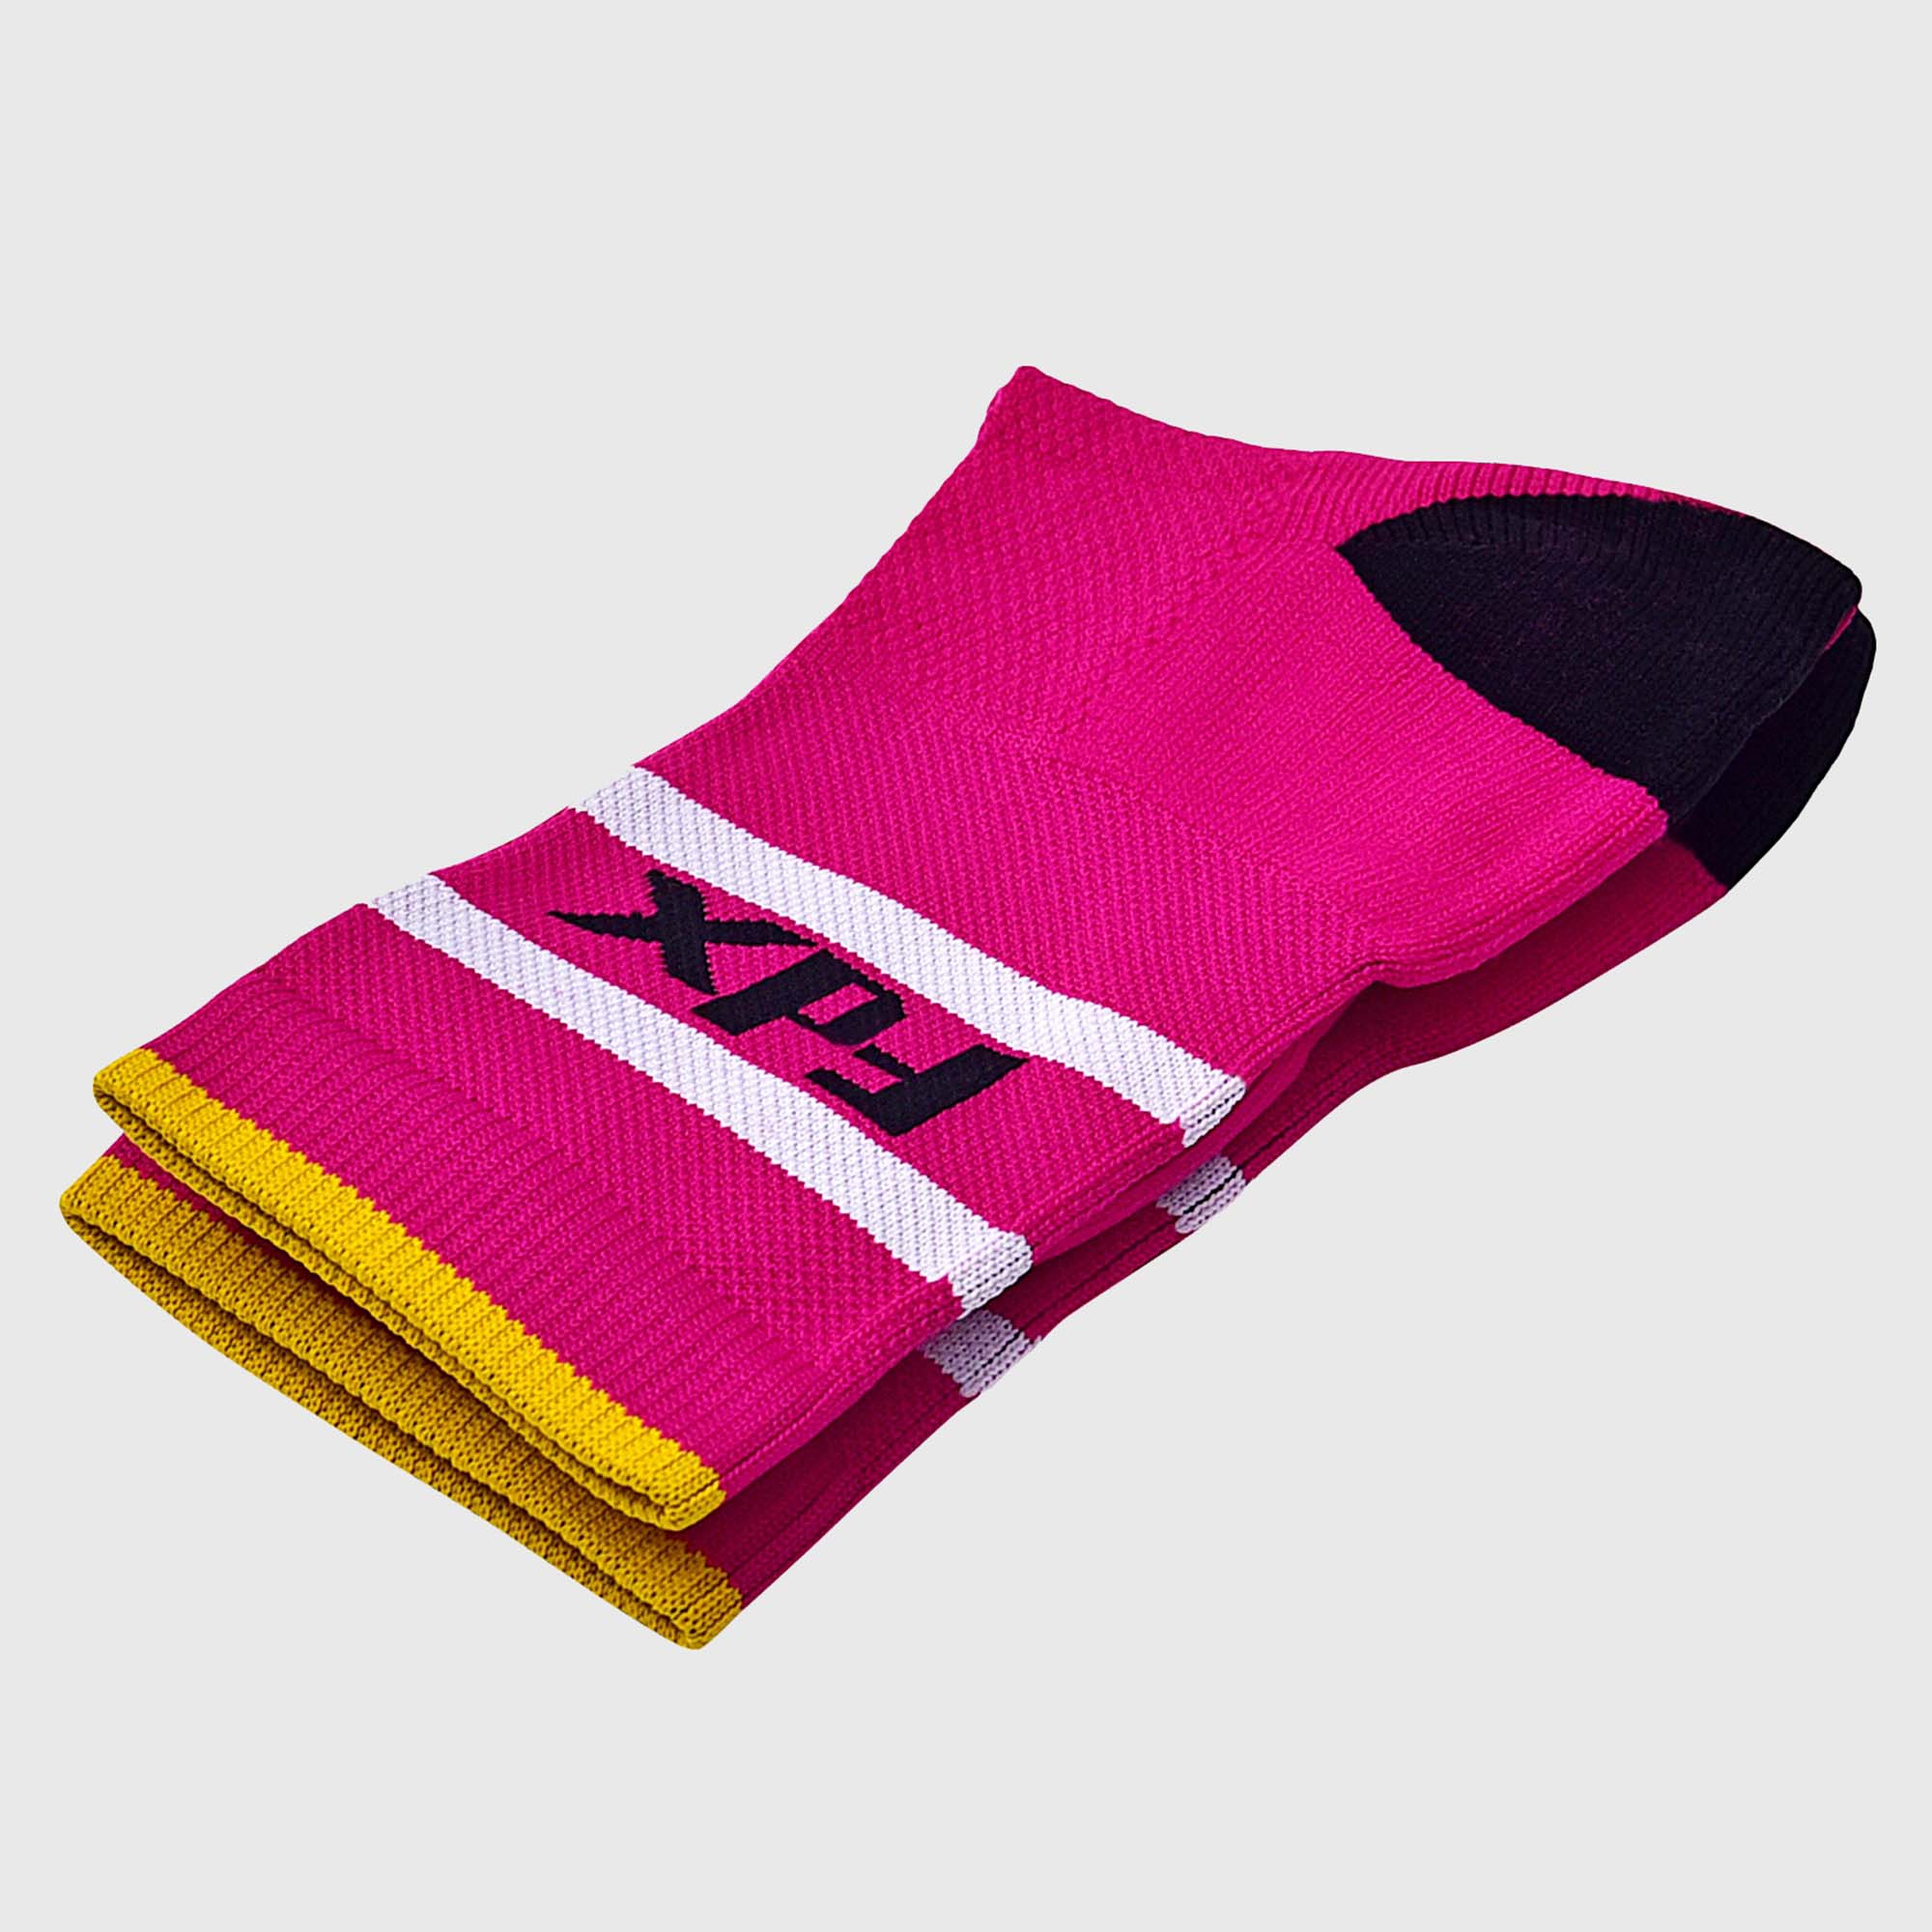 FDX Pink Compression Socks Cycling - Breathable Seamless Toe Seams Athletic Sports Socks for Running, Walking, Work, Hiking, and Flight Travel